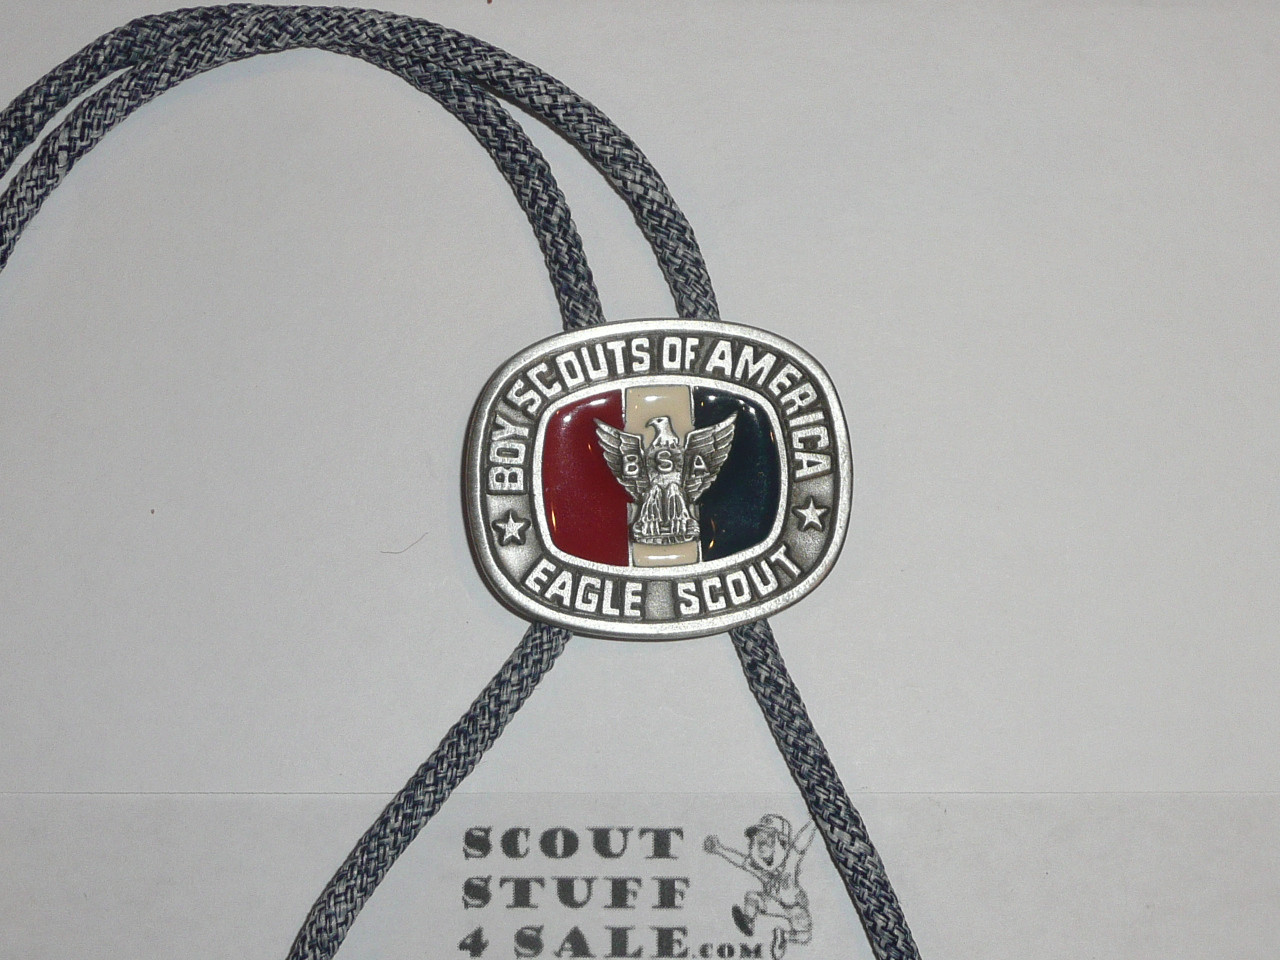 Eagle Scout Bolo Tie, Enameled, New condition, GREAT EAGLE SCOUT GIFT